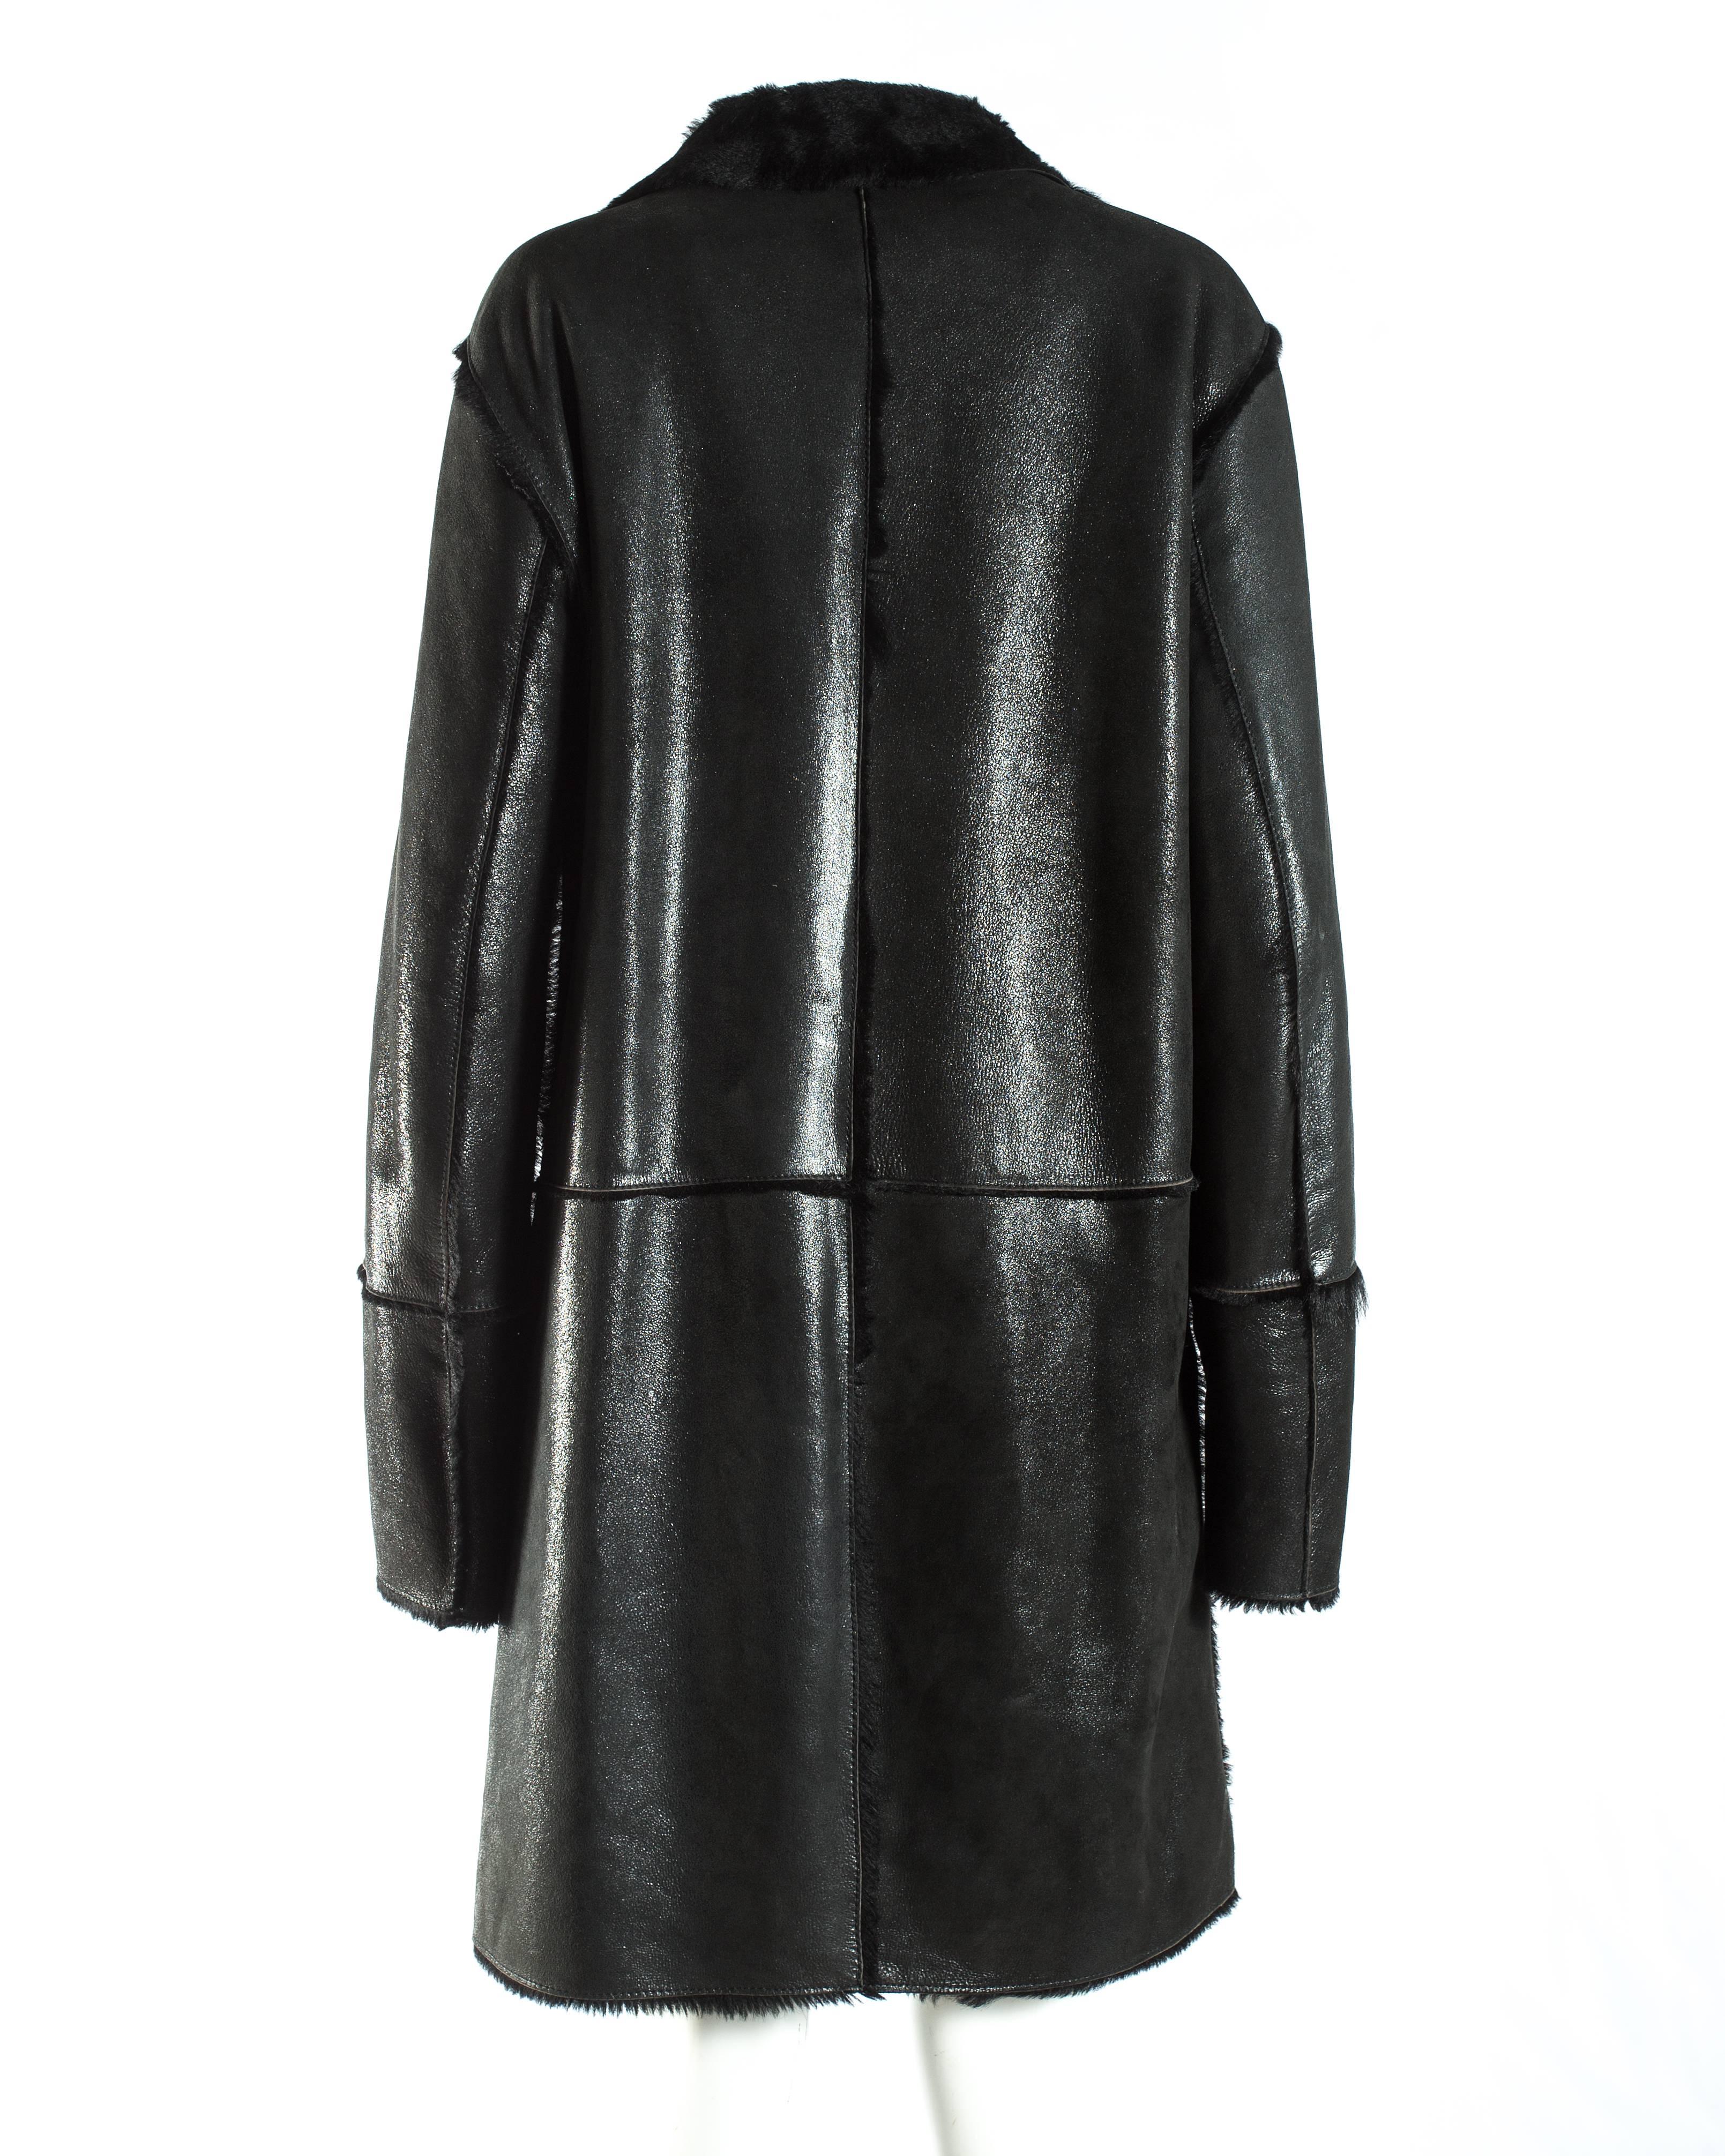 Dolce & Gabbana men's black leather and fur reversible coat, A/W 1998 1